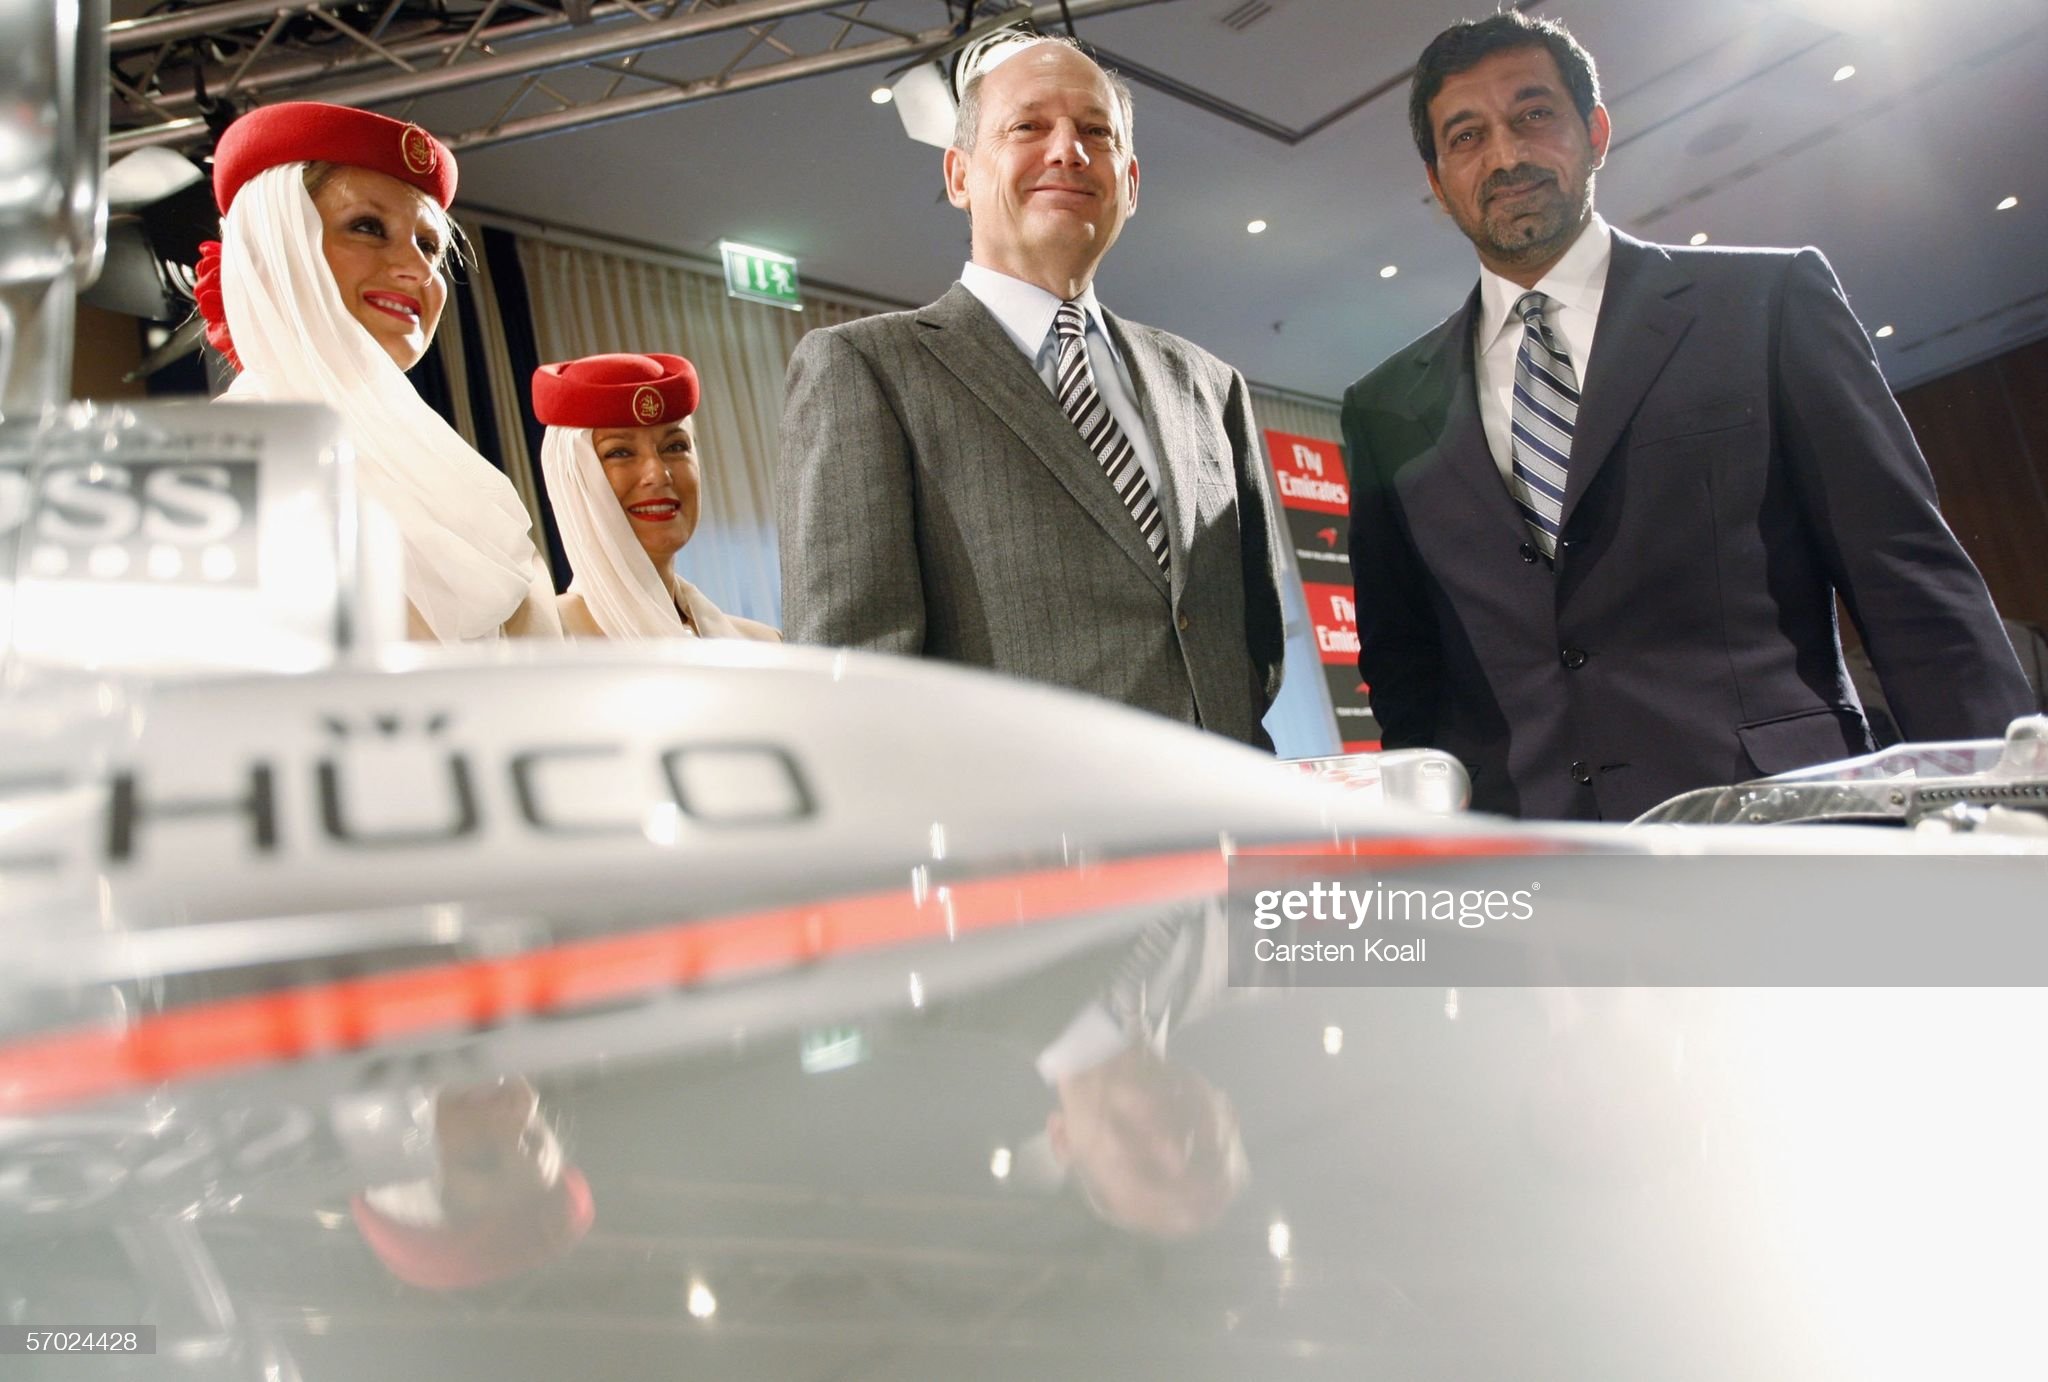 Ron Dennis, Team Principal of McLaren Mercedes and Chairman of the McLaren Group and His Highness Sheikh Ahmed bin Saeed Al-Maktoum, Chairman and Chief Executive of Emirates Airline & Group, inspect the Formula 1 car during the McLaren Mercedes press conference to announce a new sponsorship deal with Emirates at the Hotel Schweizerhof on 08 March 2006 in Berlin, Germany. 